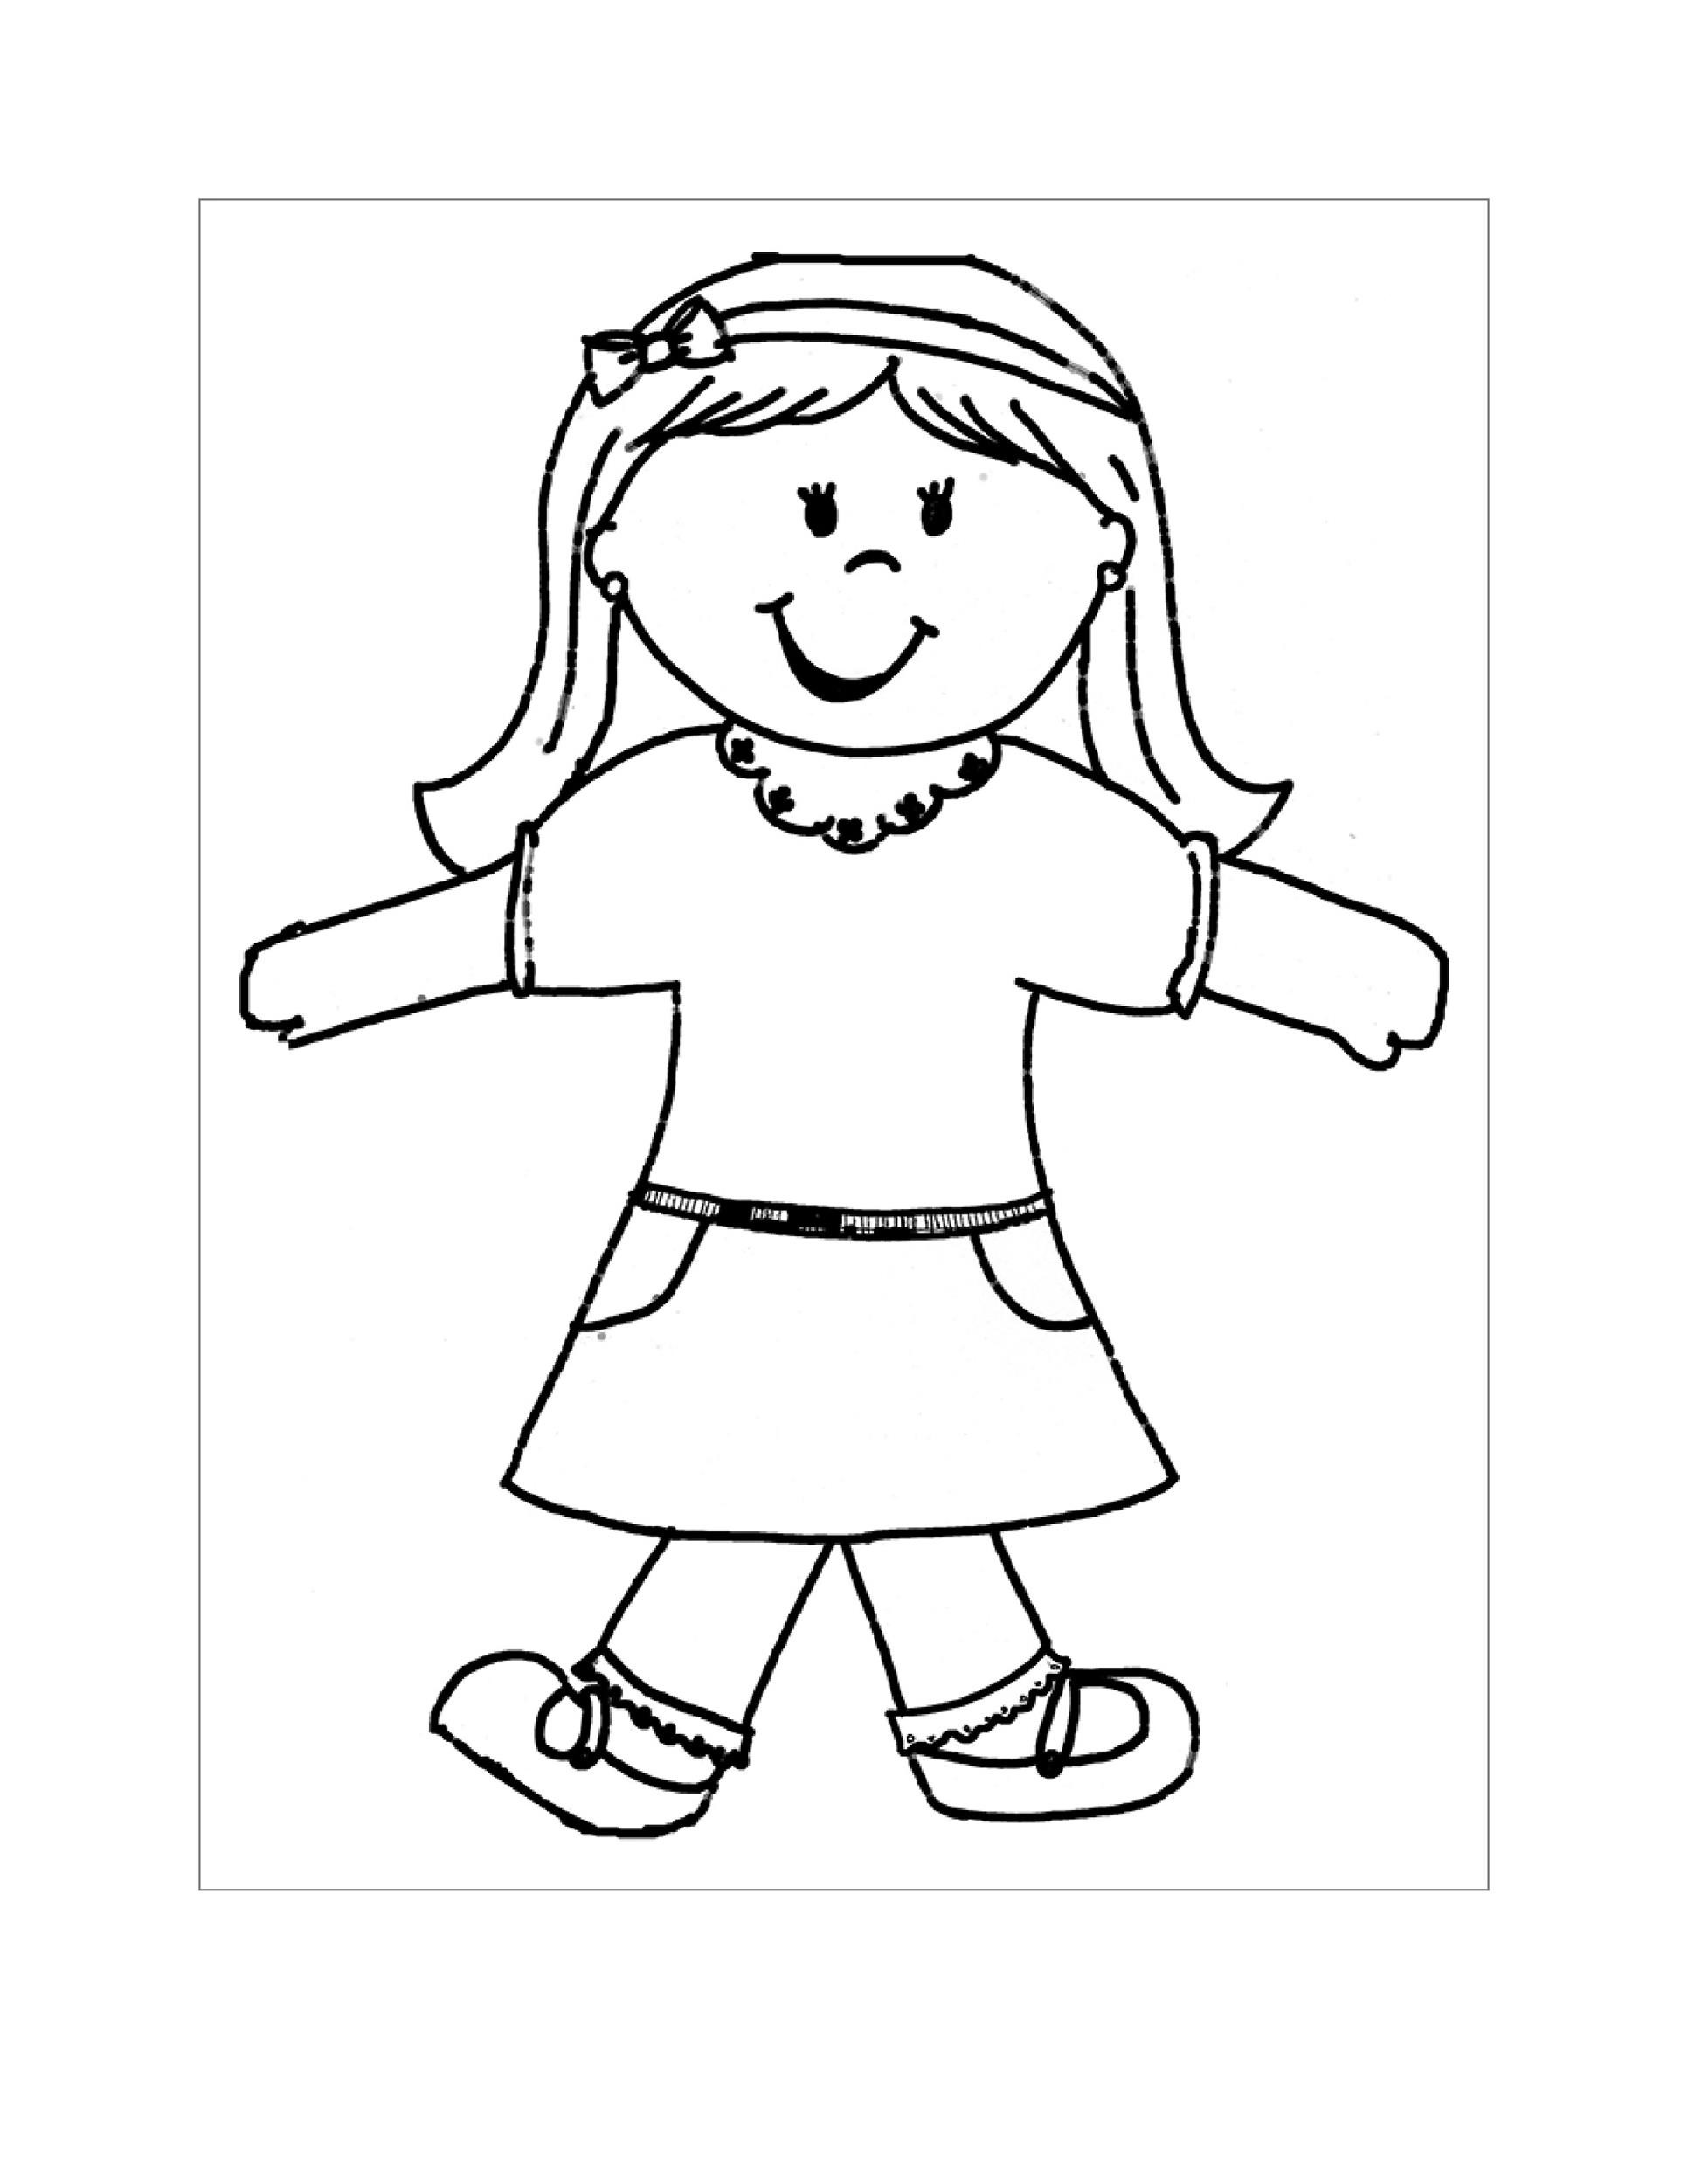 37 Flat Stanley Templates Letter Examples TemplateLab